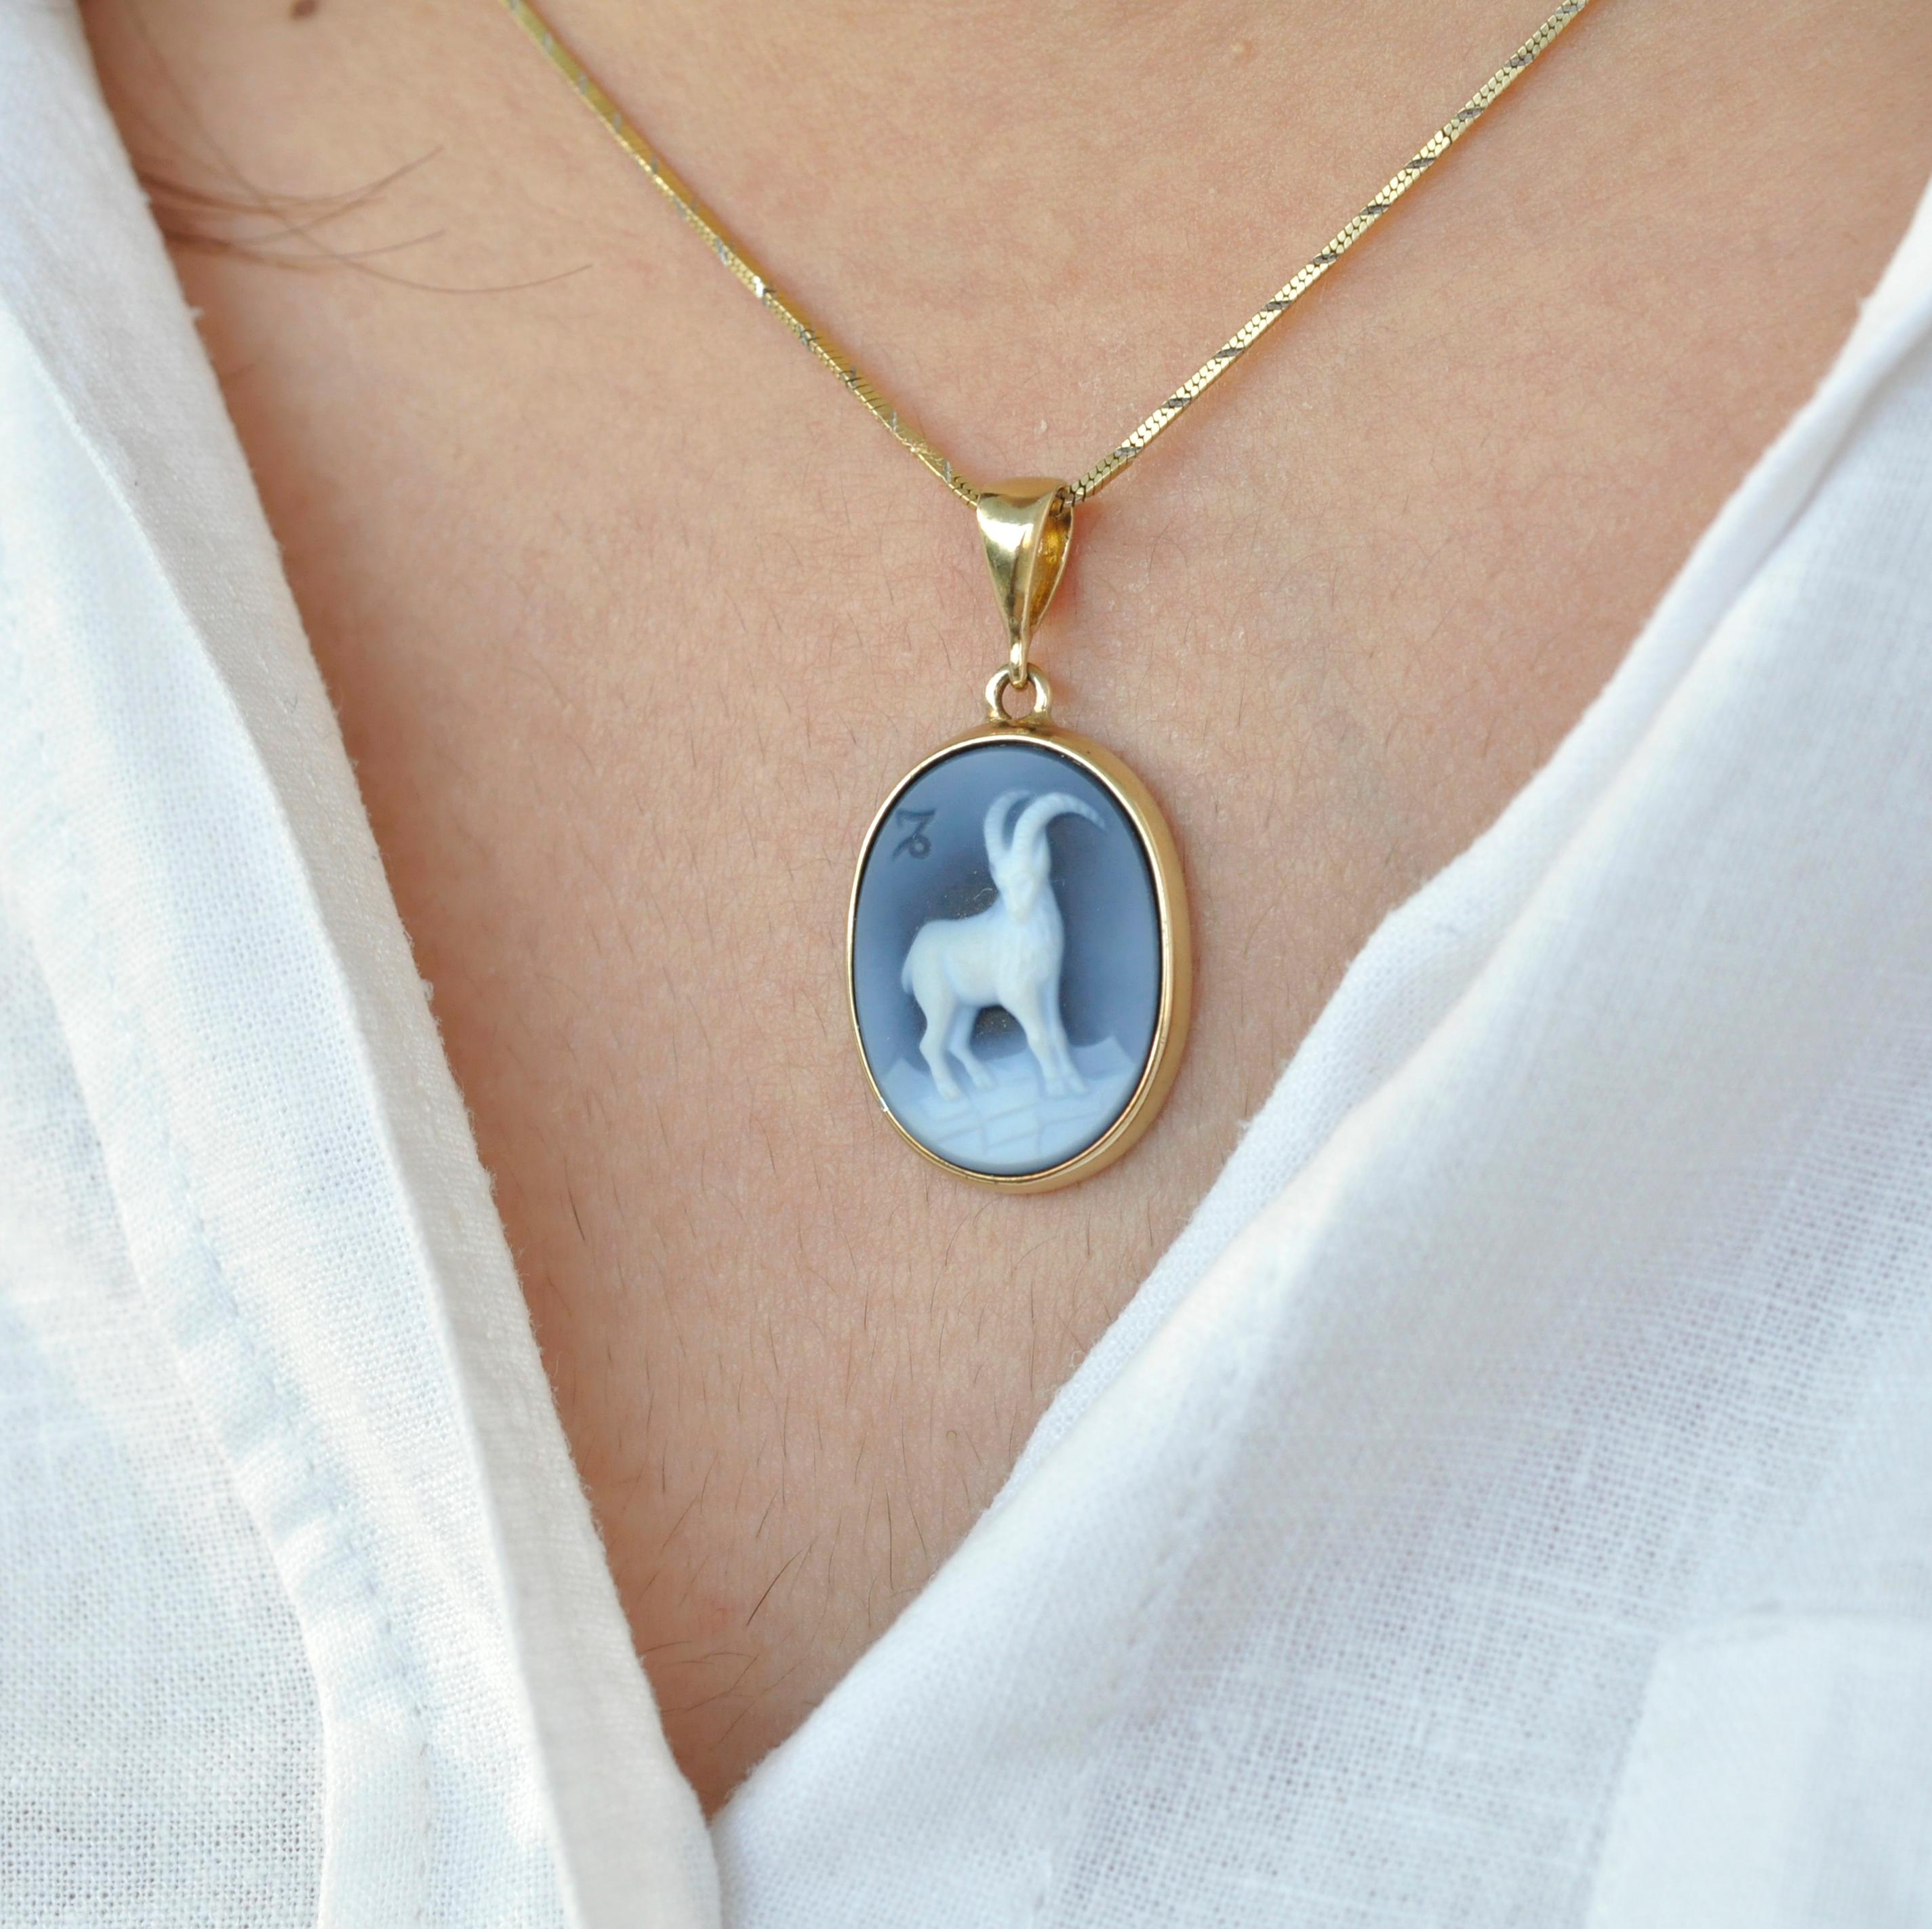 Introducing our exquisite Capricorn Zodiac Carving Cameo Pendant Necklace from the Zodiac Collection. This necklace features a stunning cameo meticulously crafted in Germany by a skilled cameo engraver. The cameo is beautifully carved on a relief of